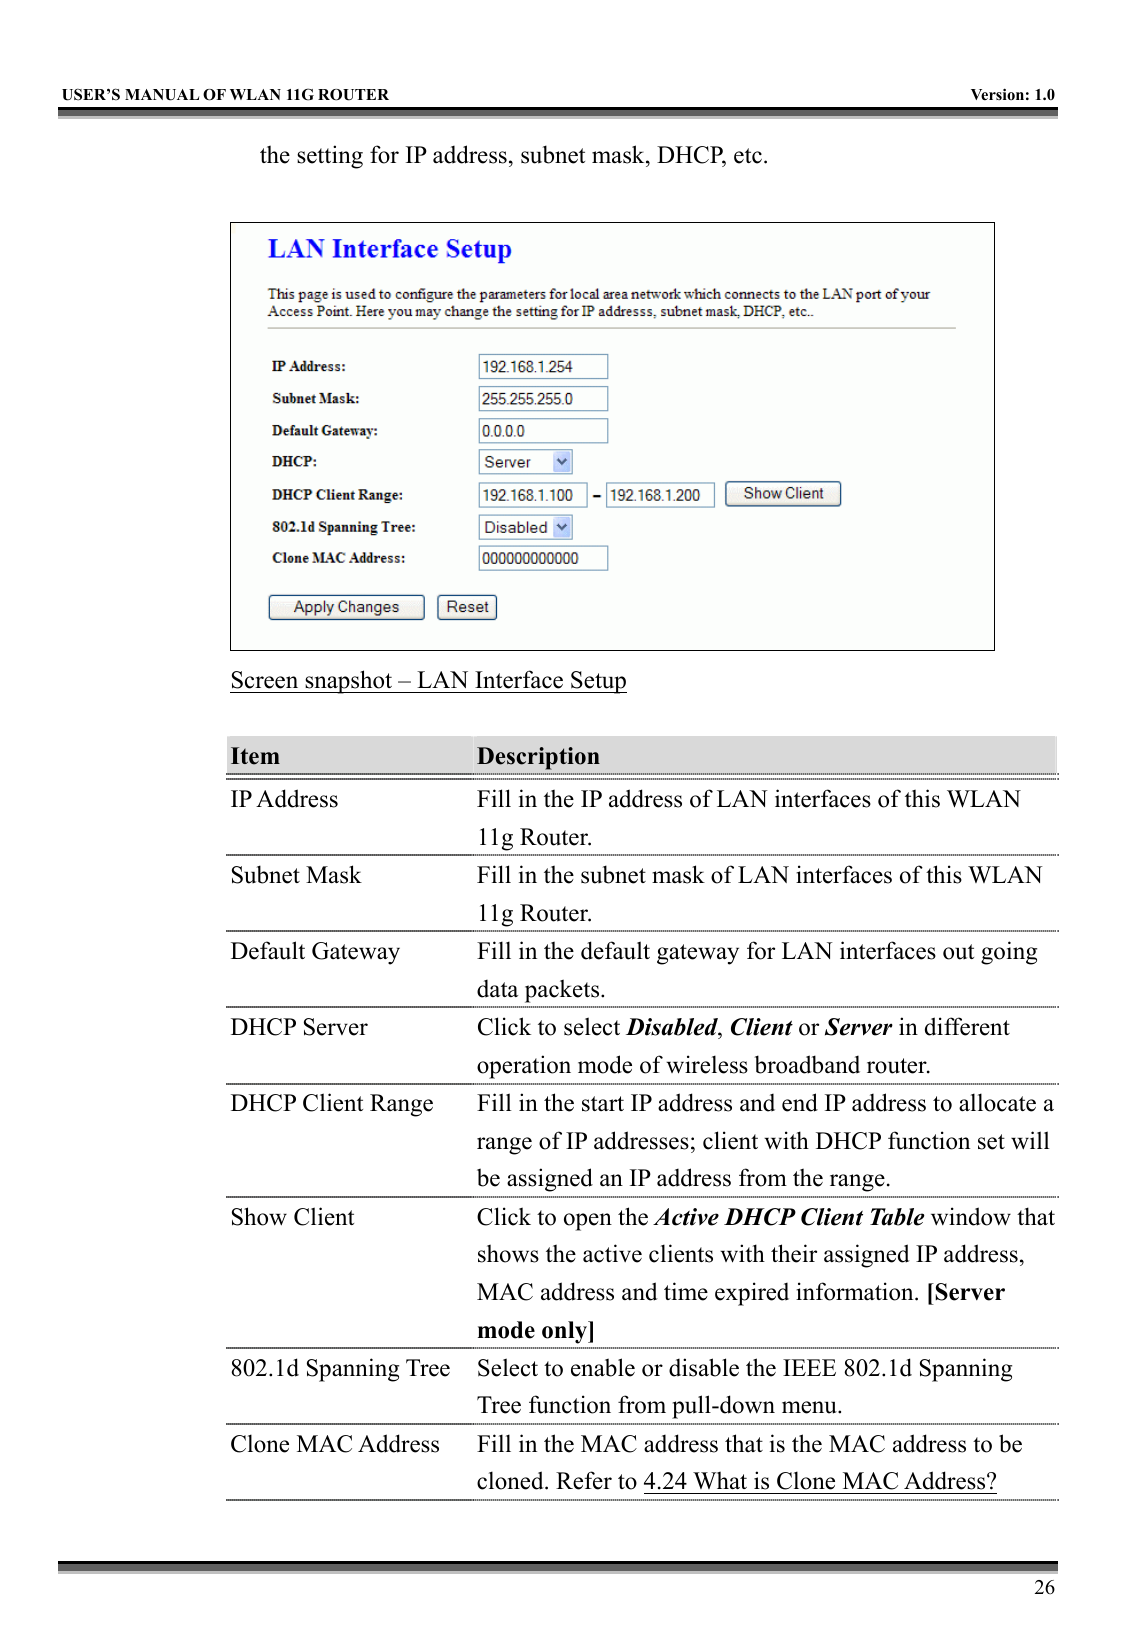   USER’S MANUAL OF WLAN 11G ROUTER    Version: 1.0     26 the setting for IP address, subnet mask, DHCP, etc.   Screen snapshot – LAN Interface Setup  Item  Description   IP Address  Fill in the IP address of LAN interfaces of this WLAN 11g Router. Subnet Mask  Fill in the subnet mask of LAN interfaces of this WLAN 11g Router. Default Gateway  Fill in the default gateway for LAN interfaces out going data packets. DHCP Server  Click to select Disabled, Client or Server in different operation mode of wireless broadband router. DHCP Client Range  Fill in the start IP address and end IP address to allocate a range of IP addresses; client with DHCP function set will be assigned an IP address from the range. Show Client  Click to open the Active DHCP Client Table window that shows the active clients with their assigned IP address, MAC address and time expired information. [Server mode only] 802.1d Spanning Tree  Select to enable or disable the IEEE 802.1d Spanning Tree function from pull-down menu. Clone MAC Address  Fill in the MAC address that is the MAC address to be cloned. Refer to 4.24 What is Clone MAC Address? 